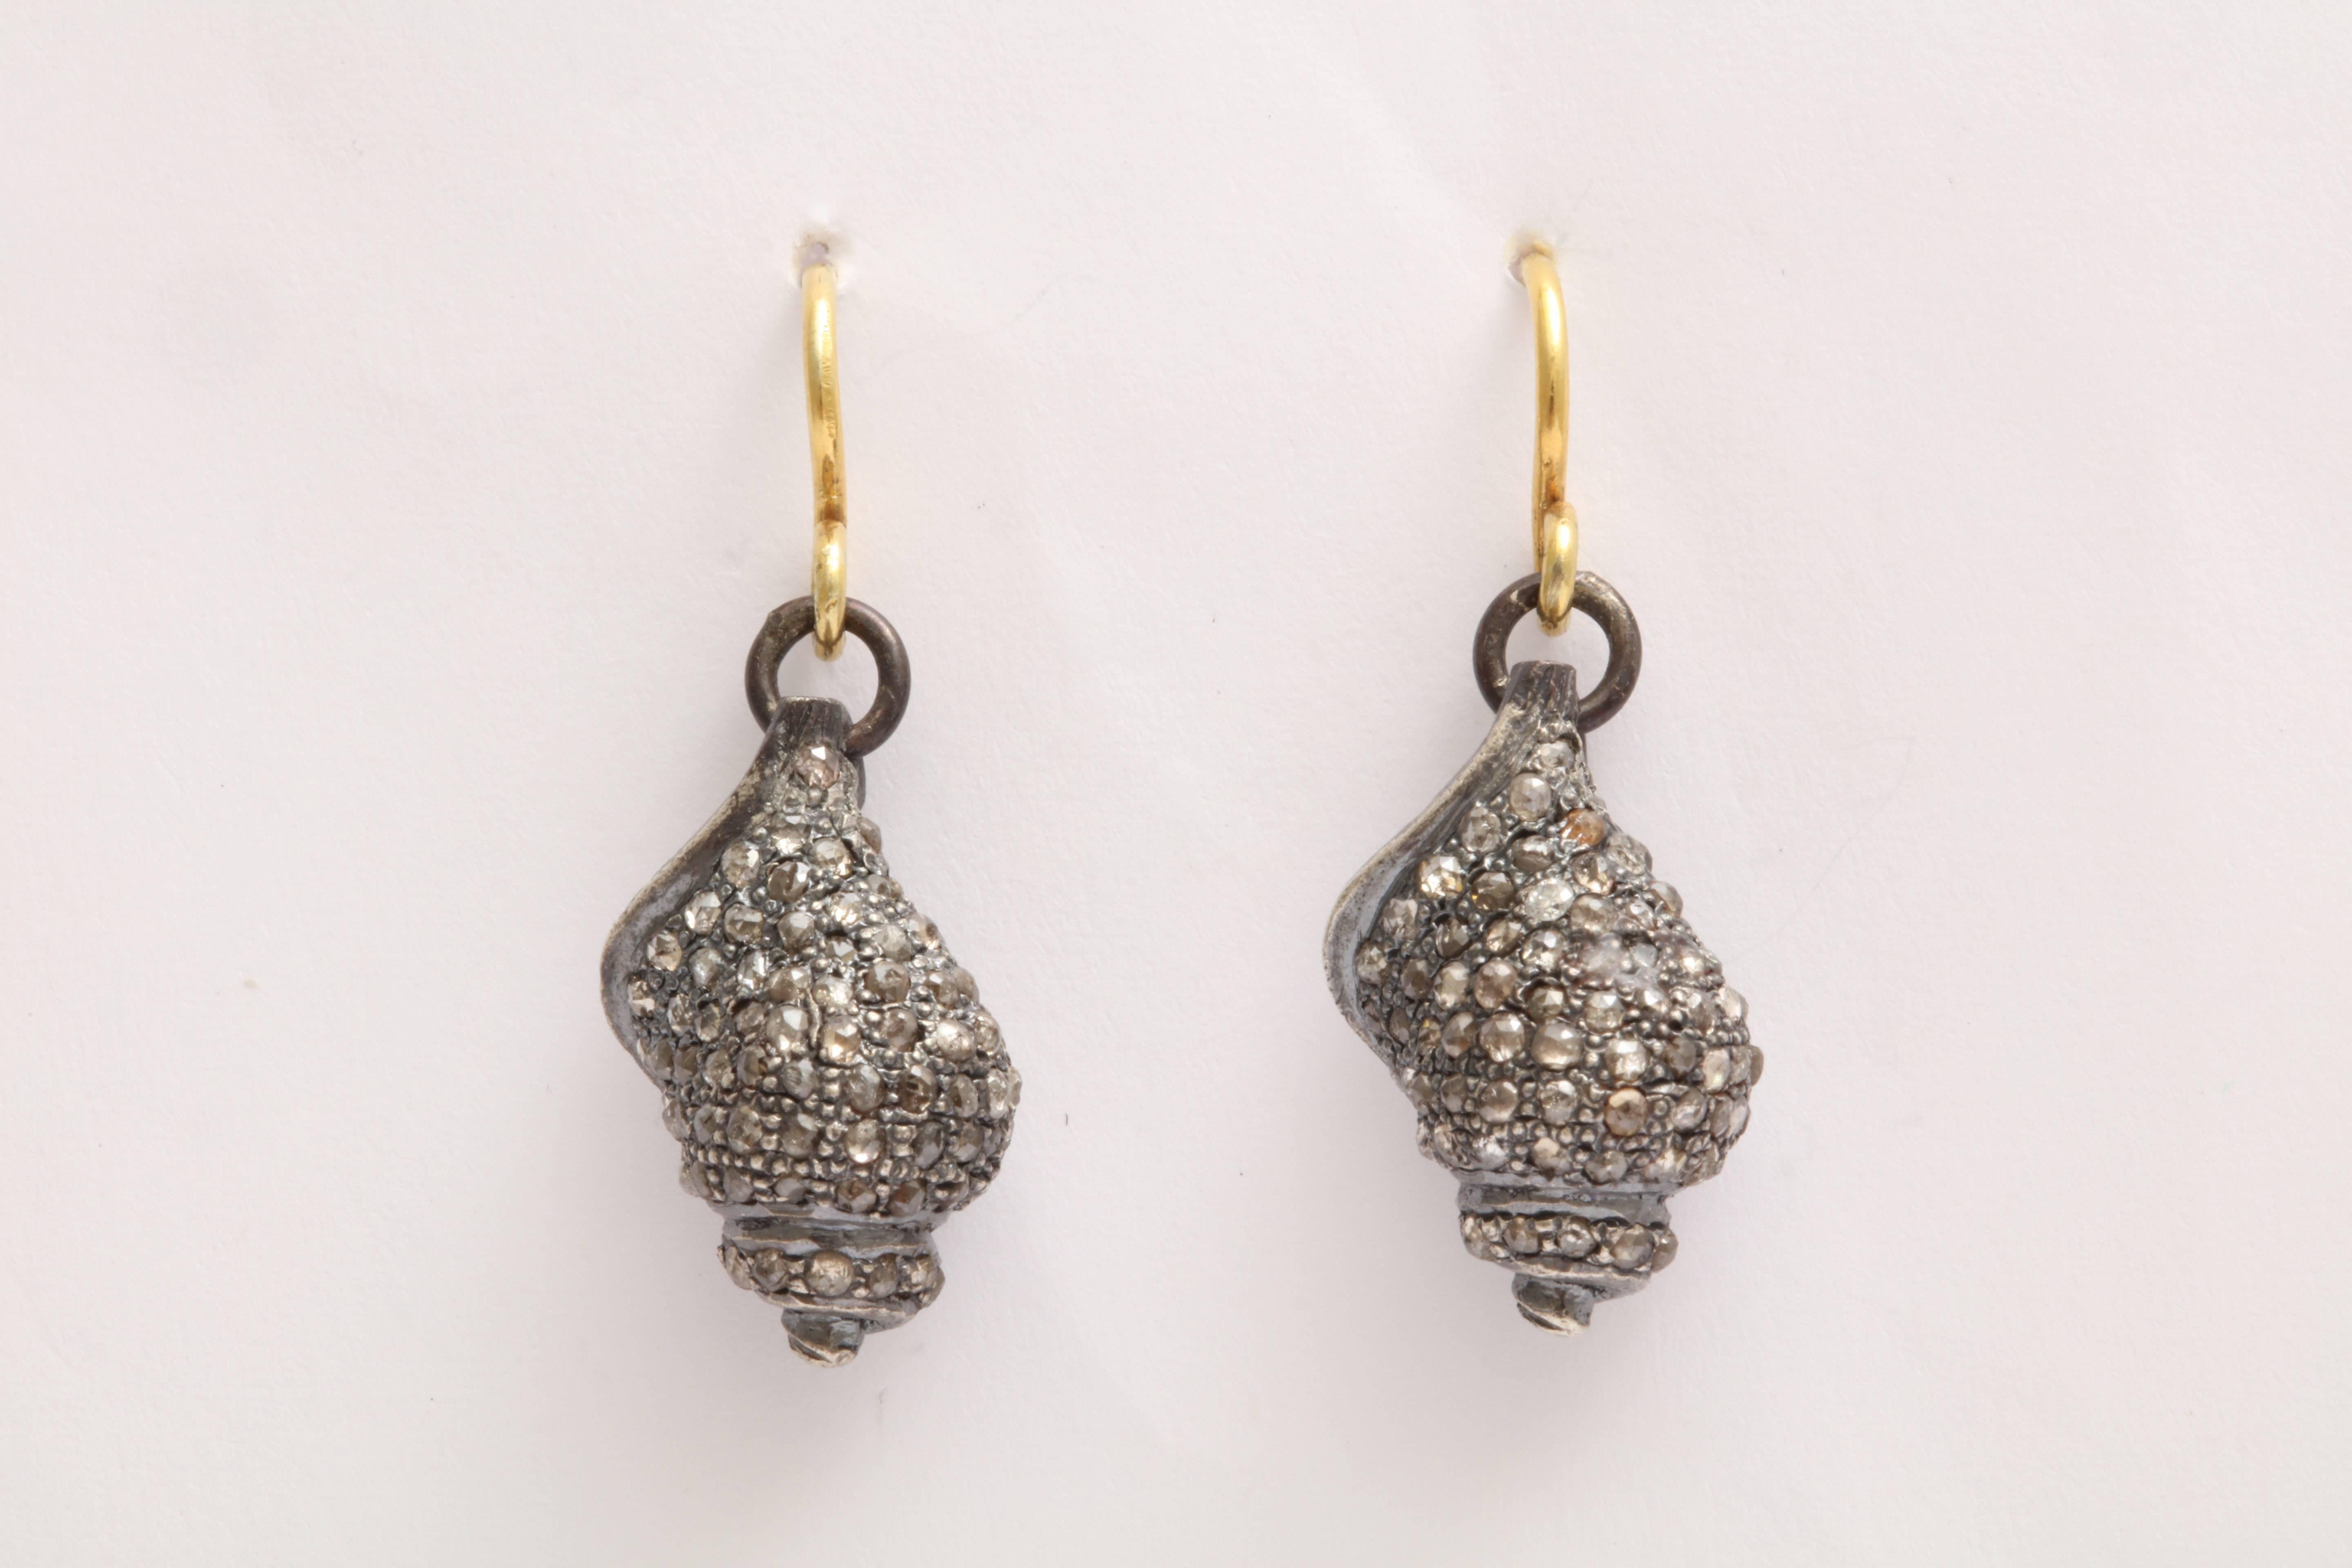 A pair of rhodium plated sterling silver and diamond seashell earrings. The shells are suspended from 18kt yellow gold ear wires. There are approximately 2.56 cts of diamonds.
Length of shell:.75 inch
Width of shell: .50 inch
Length: 1.25 inches